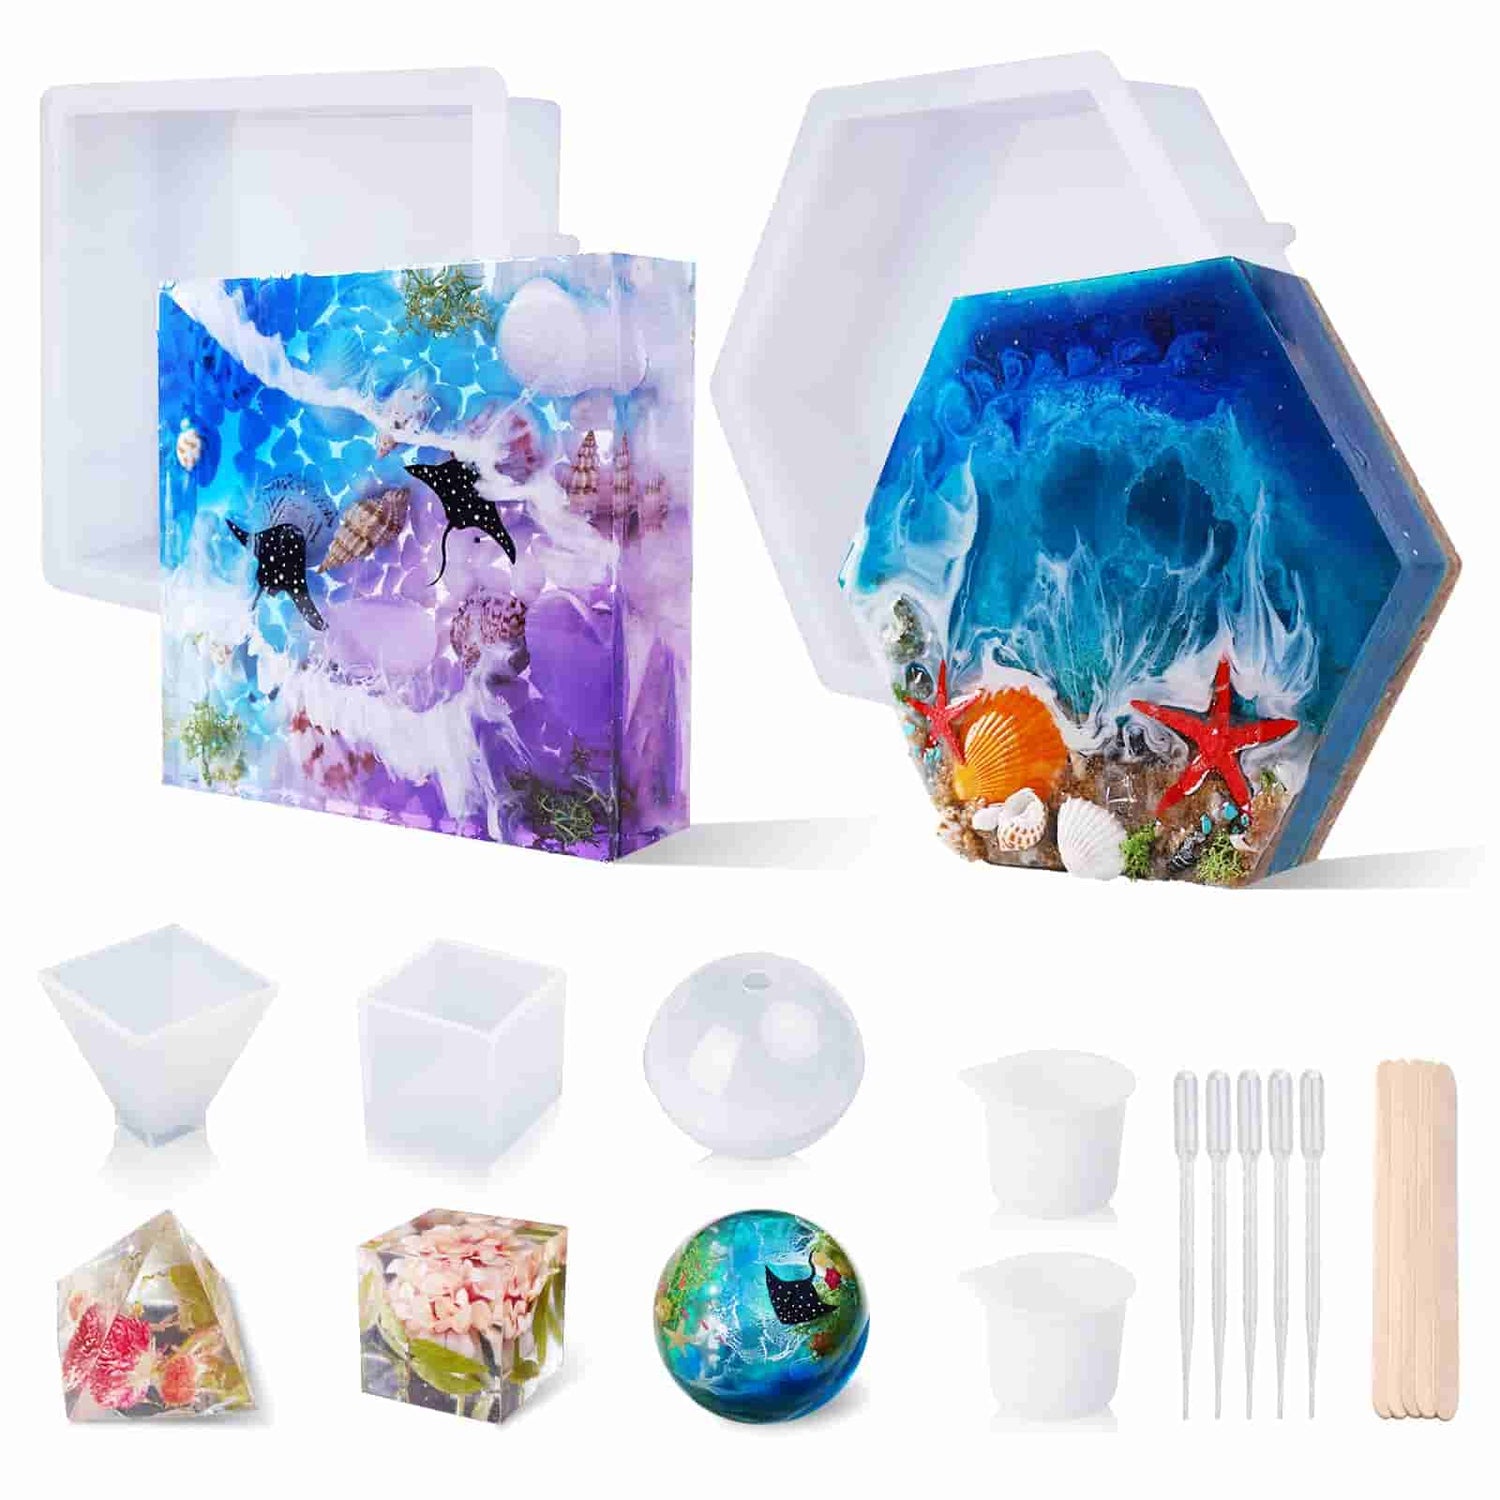 Large and Small Resin Molds Silicone Kit – Let's Resin